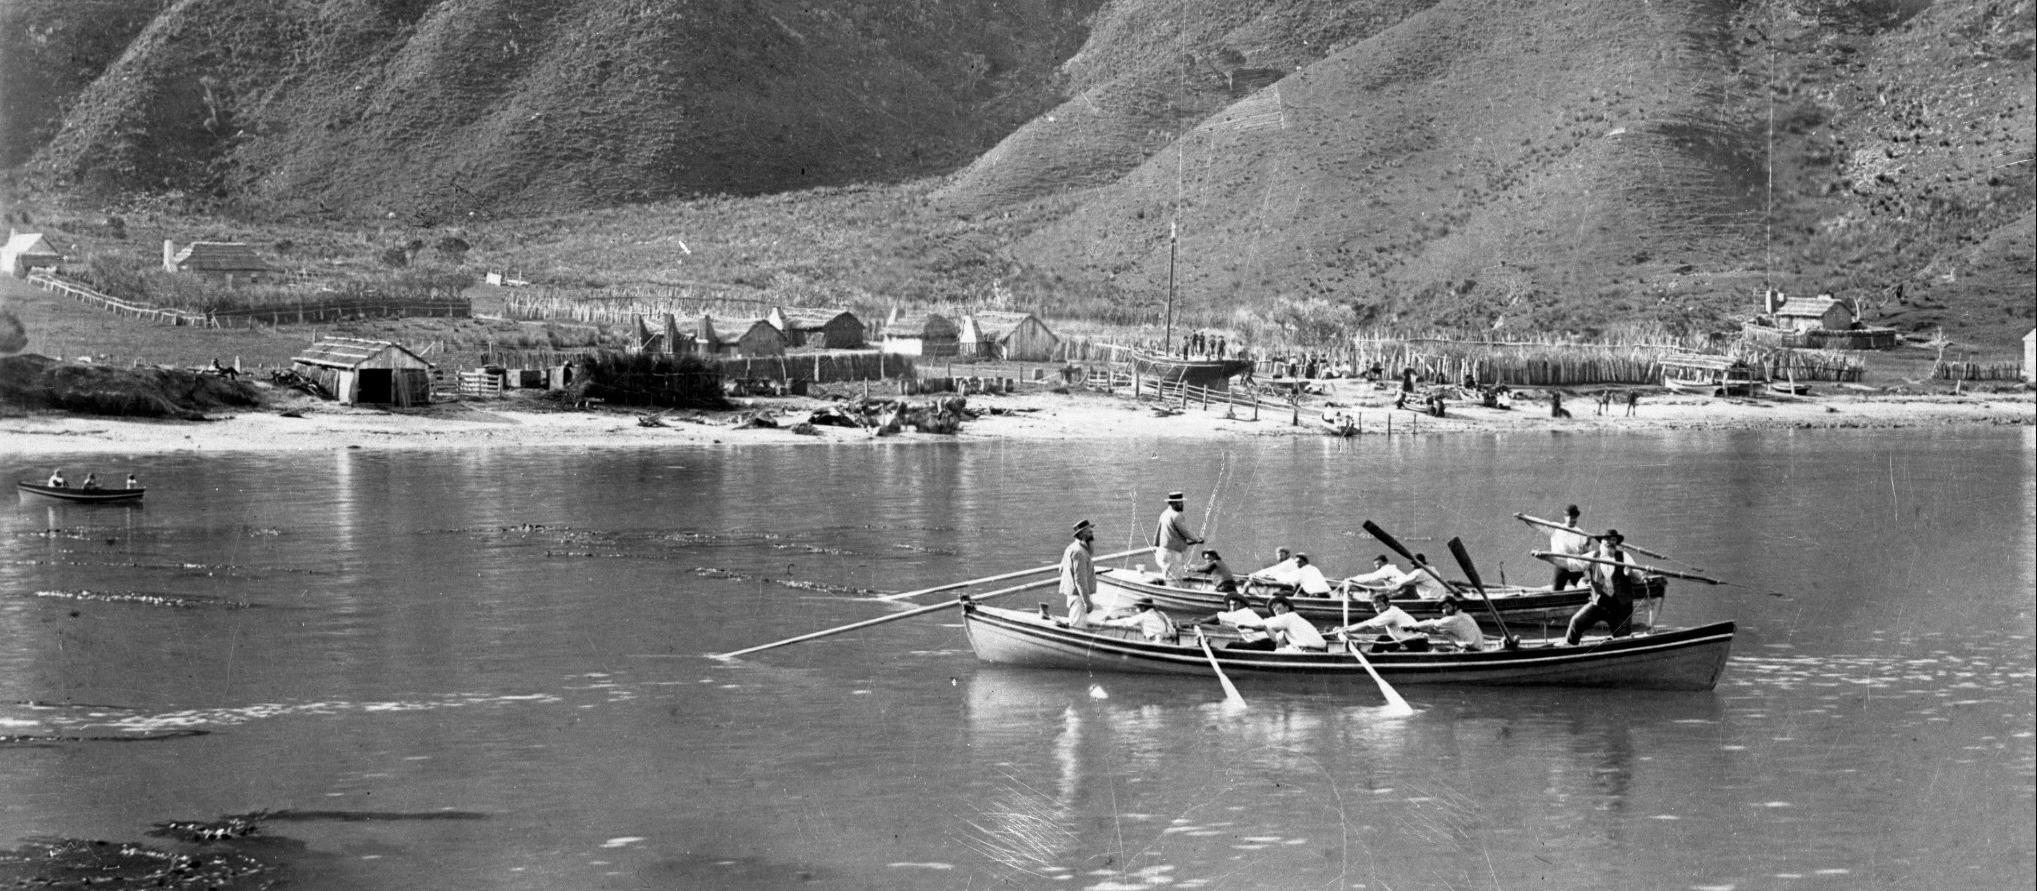 Swiftsure and another whaling boat in Te Awaiti Bay in 1890